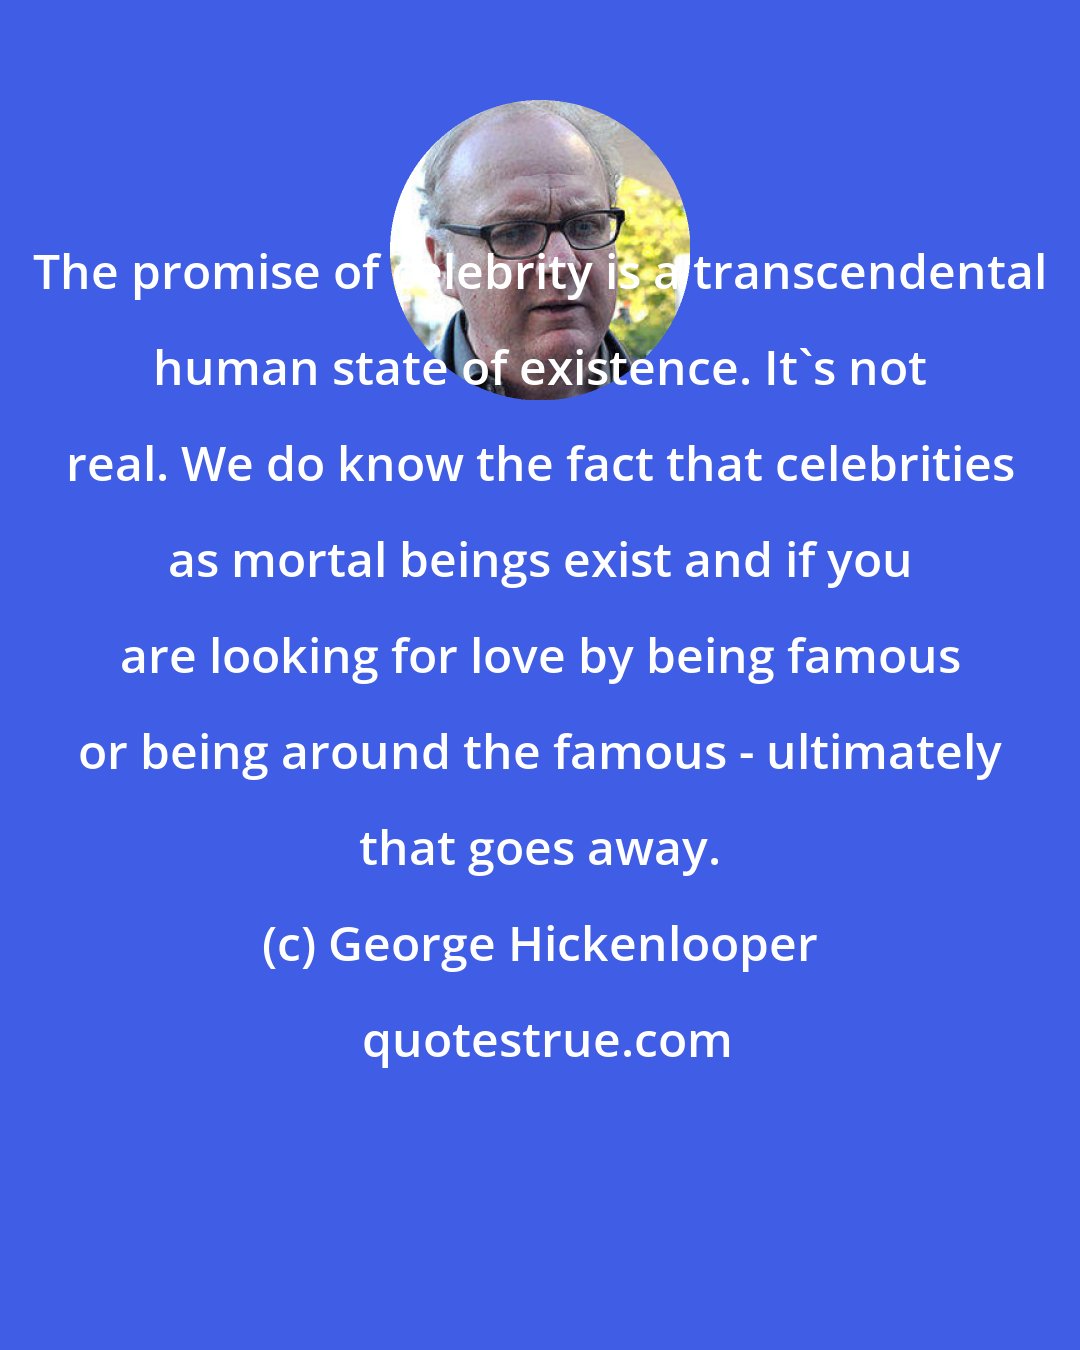 George Hickenlooper: The promise of celebrity is a transcendental human state of existence. It's not real. We do know the fact that celebrities as mortal beings exist and if you are looking for love by being famous or being around the famous - ultimately that goes away.